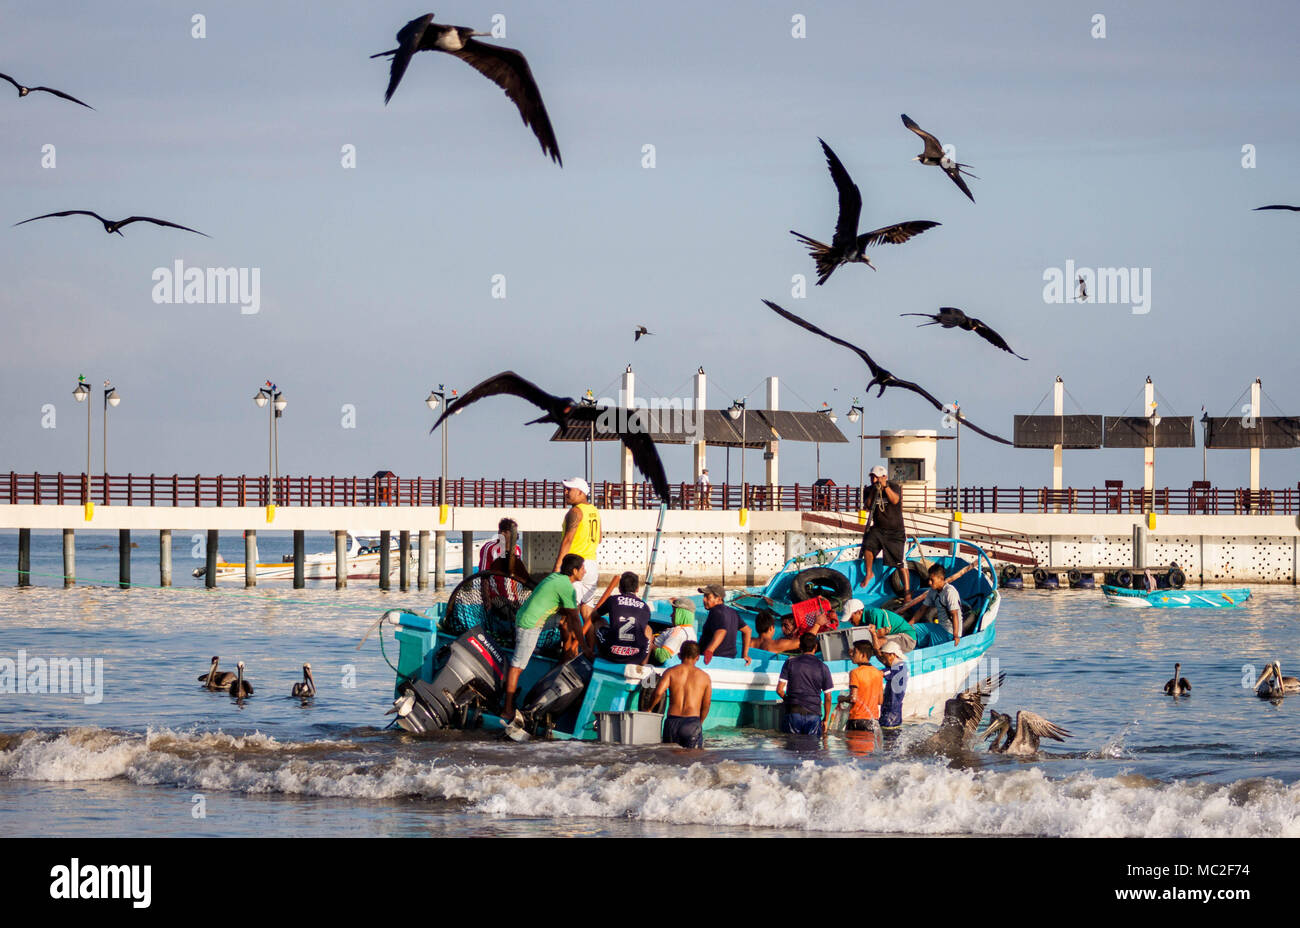 A morning fishing market in the town of Puerto Lopez, Ecuador. Fisherman carry buckets of fish ashore as black crows and birds try to grab fish. Stock Photo